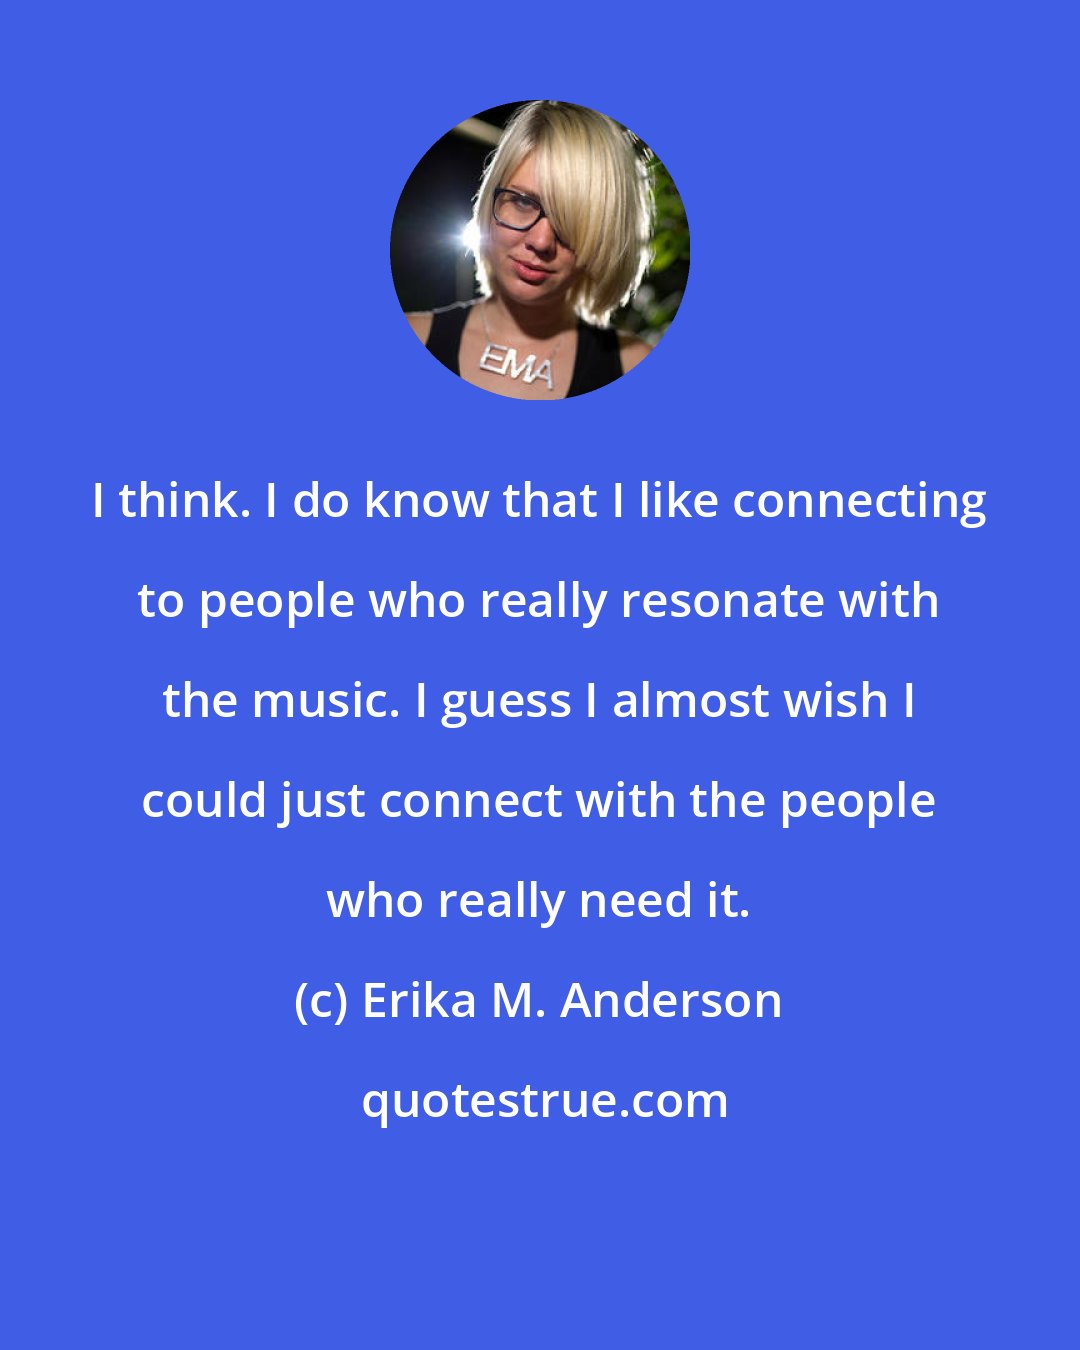 Erika M. Anderson: I think. I do know that I like connecting to people who really resonate with the music. I guess I almost wish I could just connect with the people who really need it.